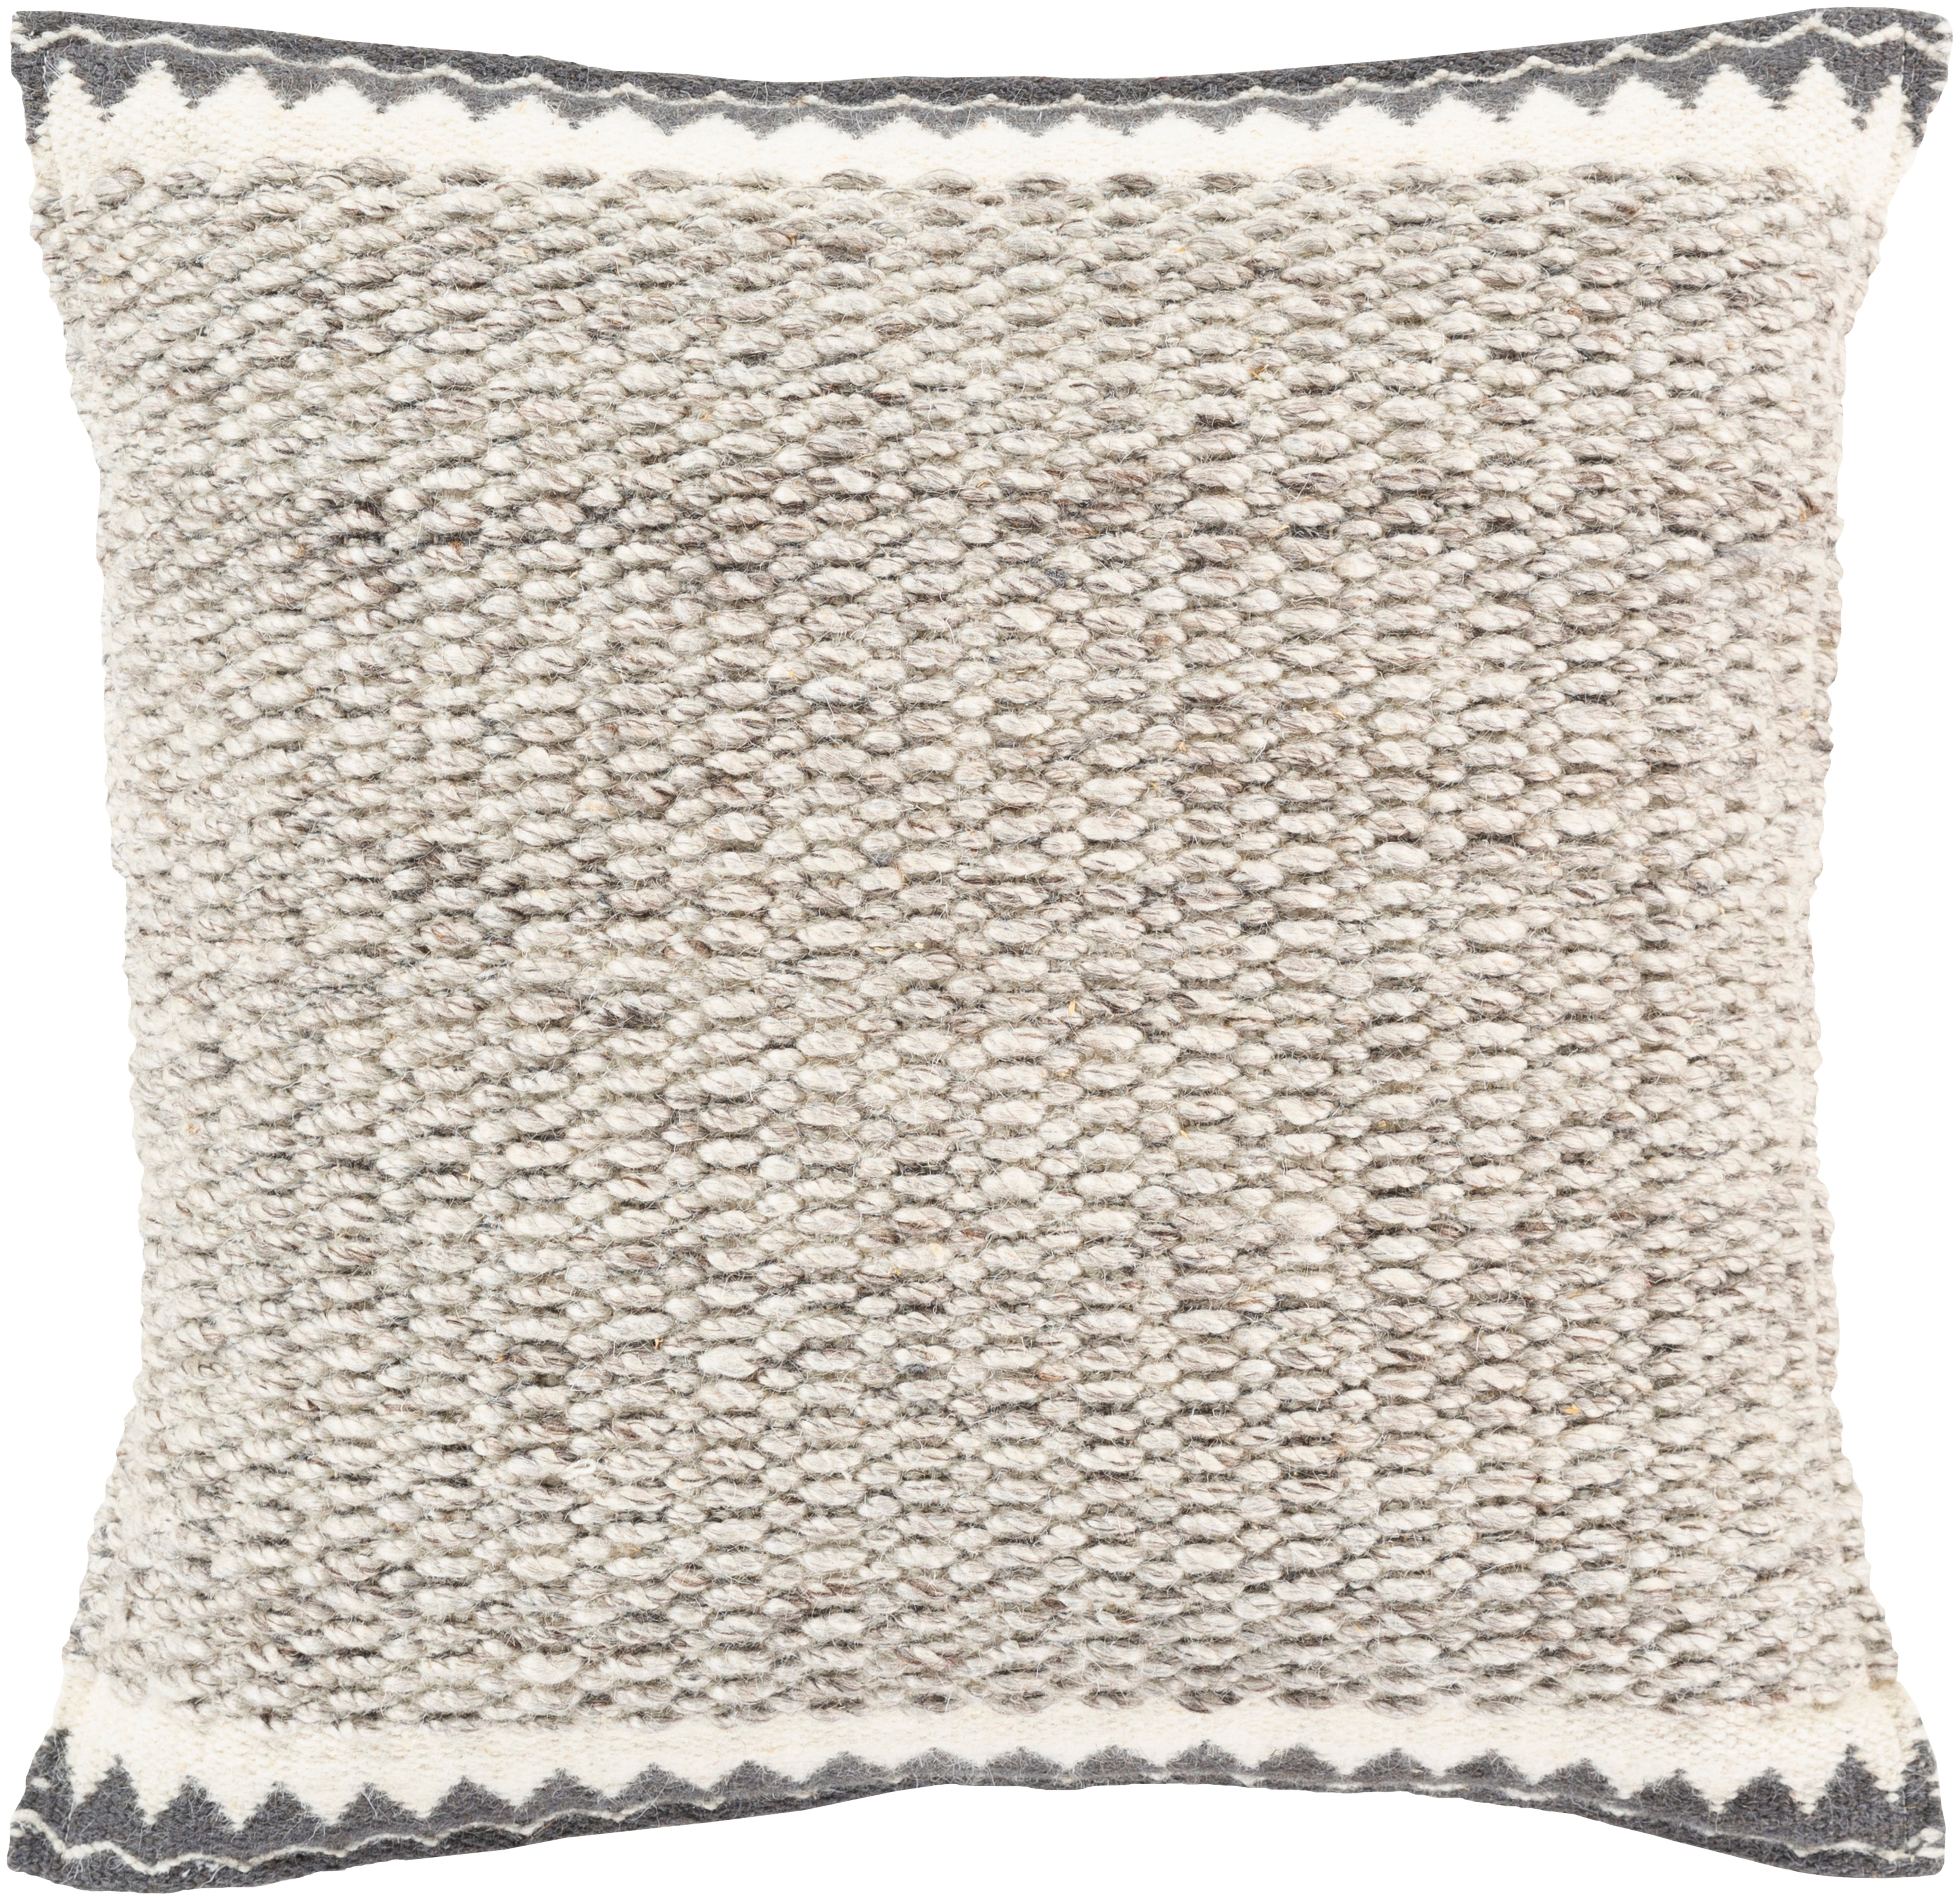 Faroe Throw Pillow, 18" x 18", pillow cover only - Surya